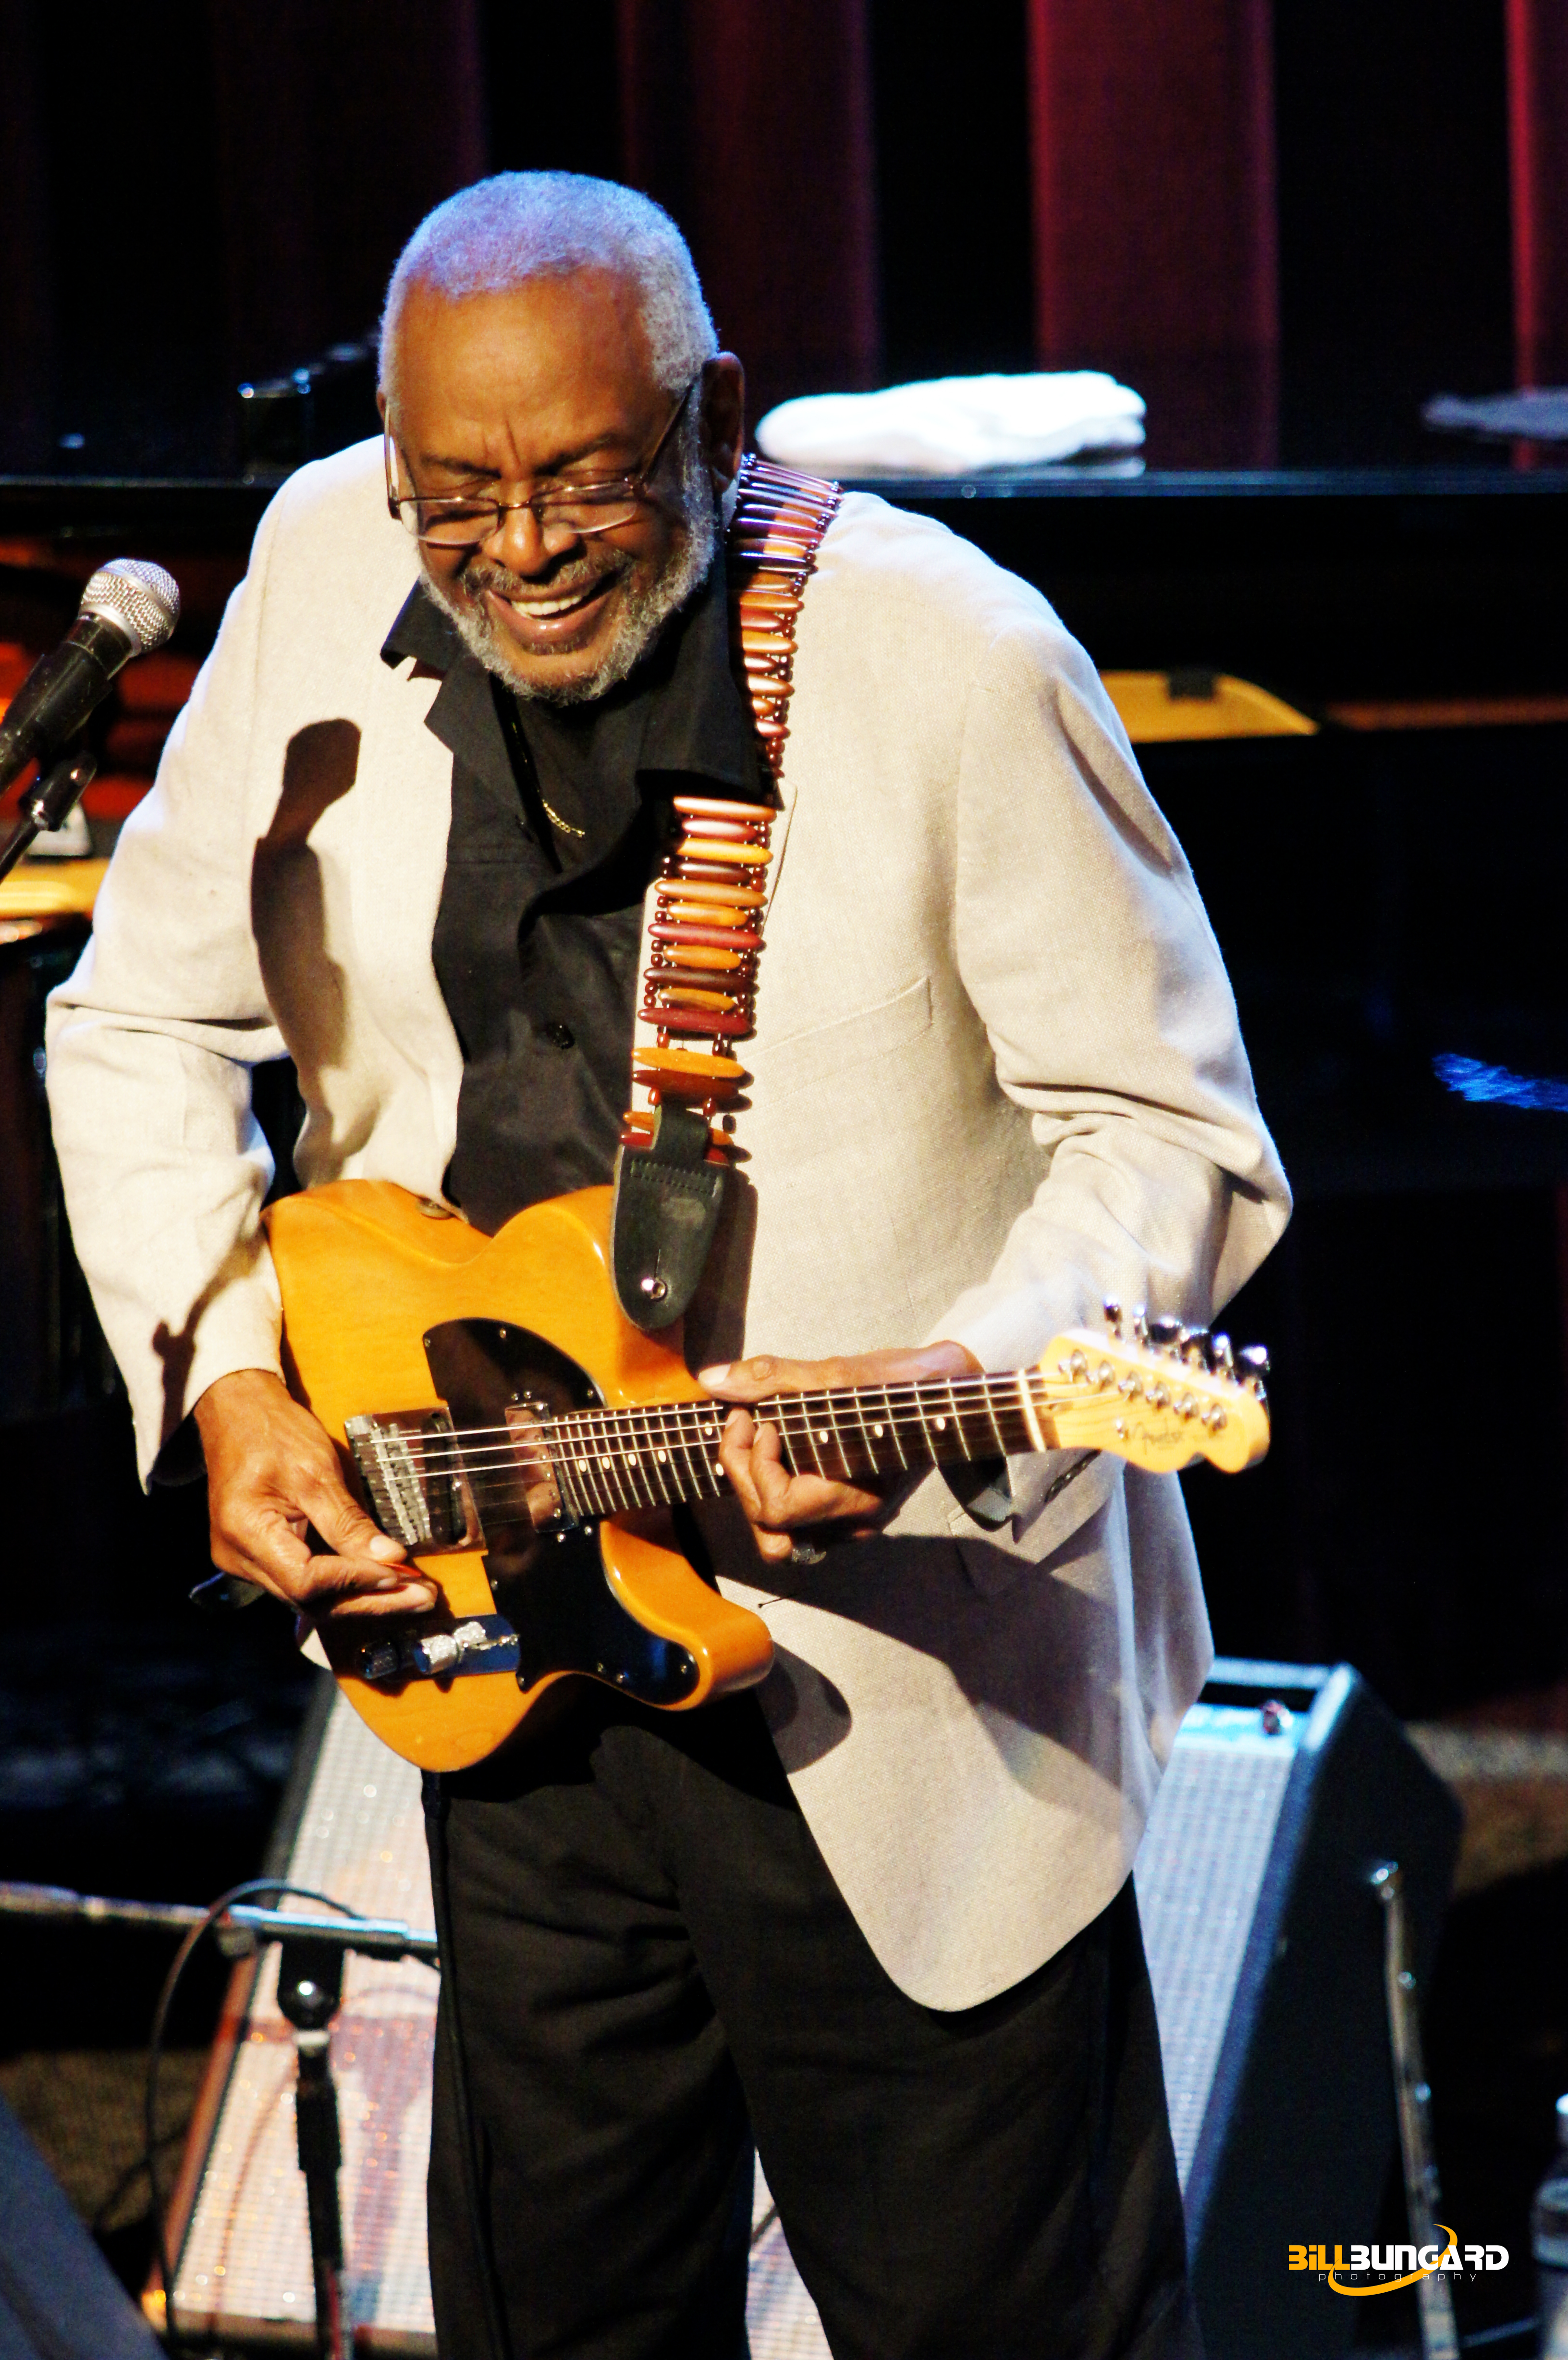 Wendell Holmes at Jazz Alley (Photo by Bill Bungard)